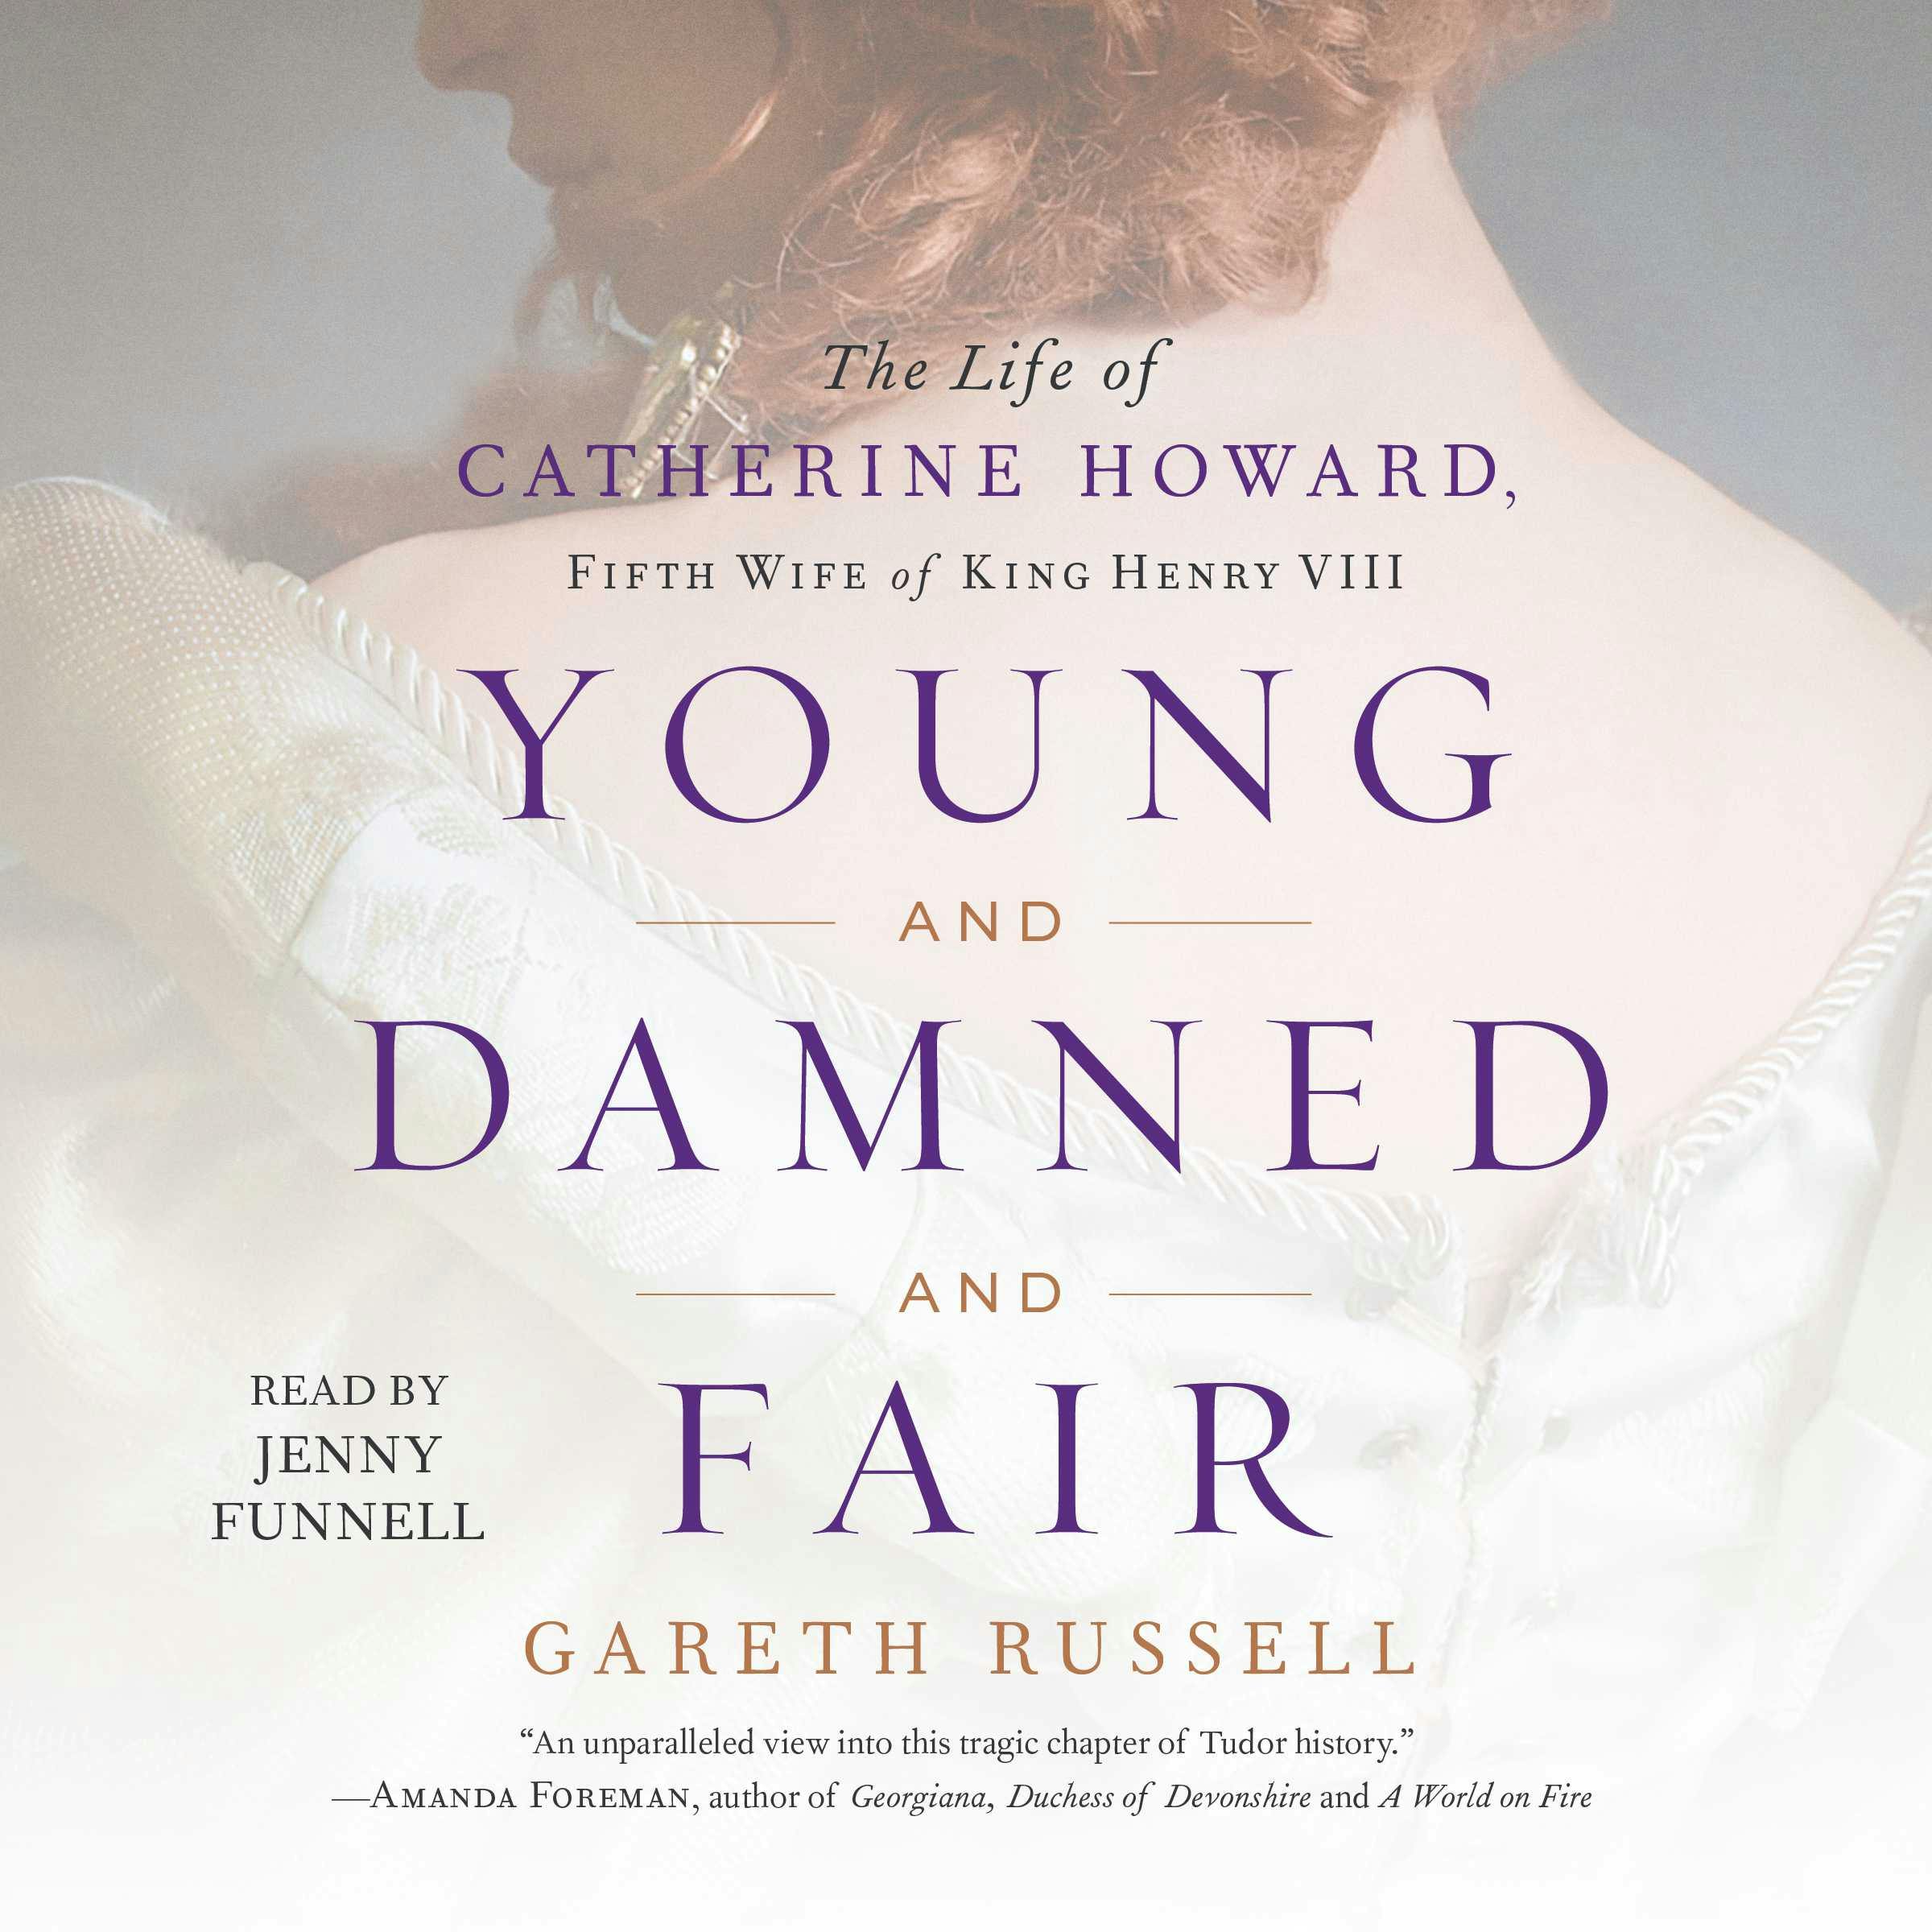 Young and Damned and Fair: The Life of Catherine Howard, Fifth Wife of King Henry VIII - Gareth Russell